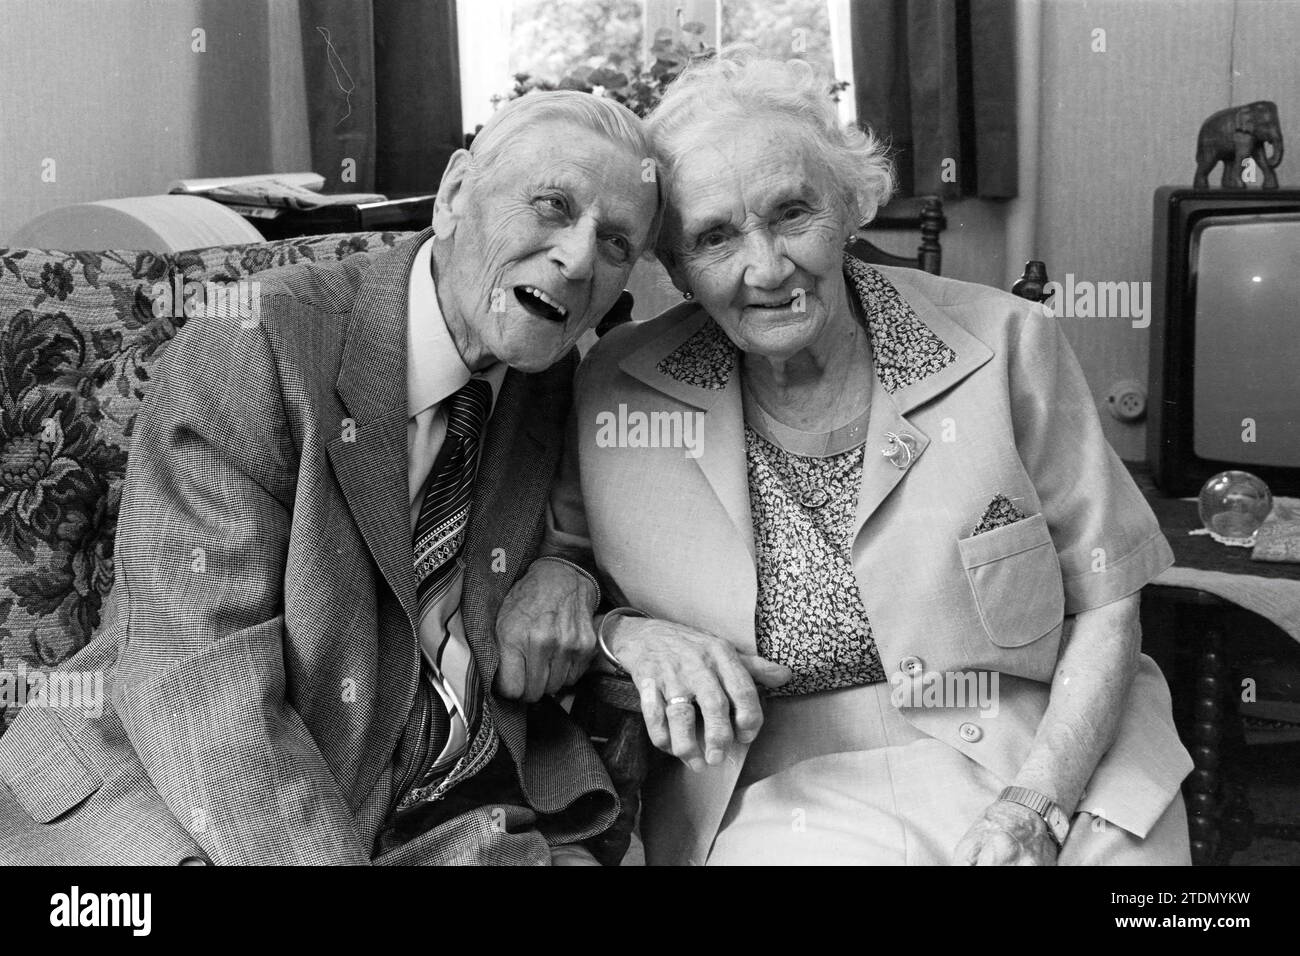 70-year-old couple Benard, Bloemendaal, Couples, Bloemendaal, 01-08-1983, Whizgle News from the Past, Tailored for the Future. Explore historical narratives, Dutch The Netherlands agency image with a modern perspective, bridging the gap between yesterday's events and tomorrow's insights. A timeless journey shaping the stories that shape our future Stock Photo